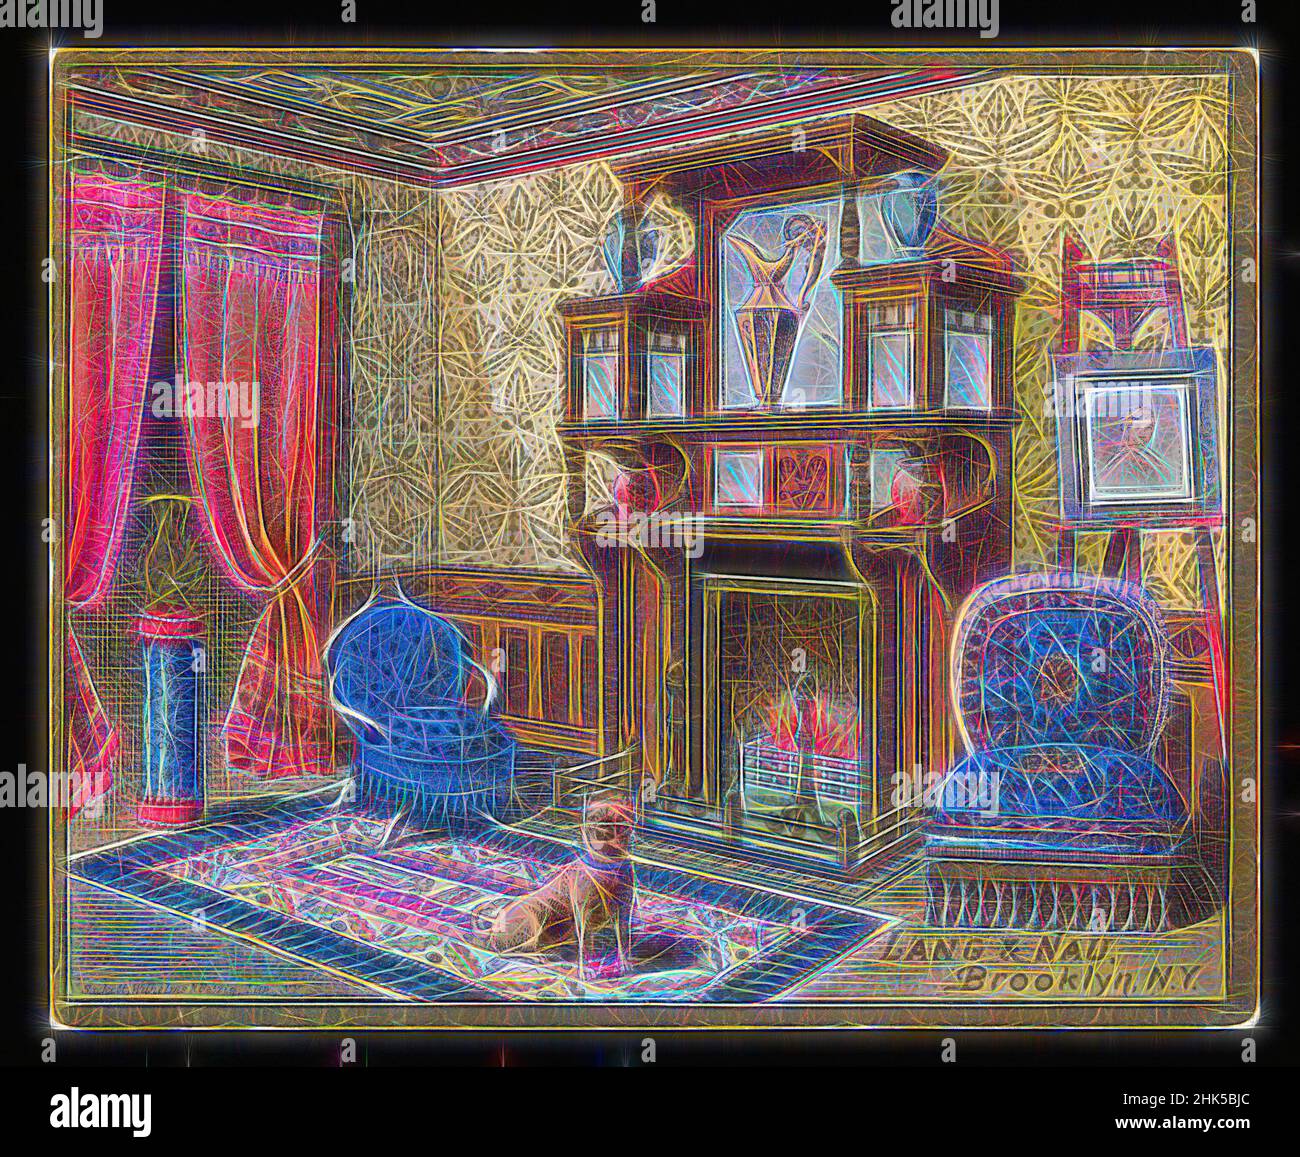 Inspired by Trade Card for the Firm Lang & Nau, Polychromed lithograph, after 1882, 4 3/8 x 5 3/8 in., 11.1 x 13.7 cm, advertisement, dog, drapes, fireplace, furnishings, interior, mantle, trade card, Victorian era, wainscotting, Reimagined by Artotop. Classic art reinvented with a modern twist. Design of warm cheerful glowing of brightness and light ray radiance. Photography inspired by surrealism and futurism, embracing dynamic energy of modern technology, movement, speed and revolutionize culture Stock Photo